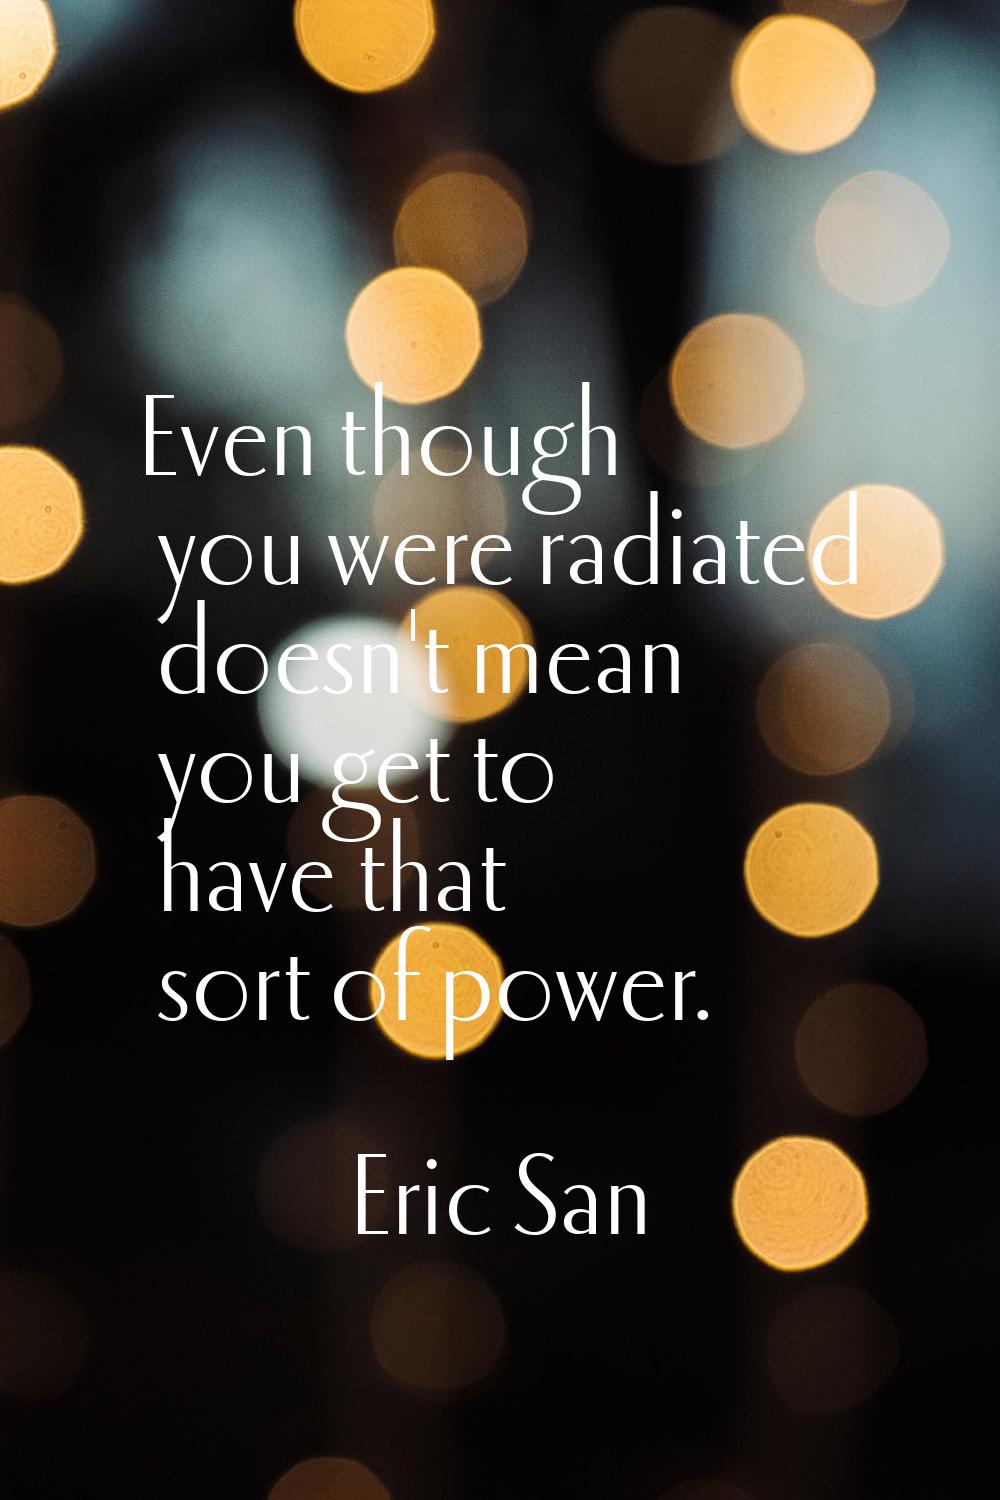 Even though you were radiated doesn't mean you get to have that sort of power.